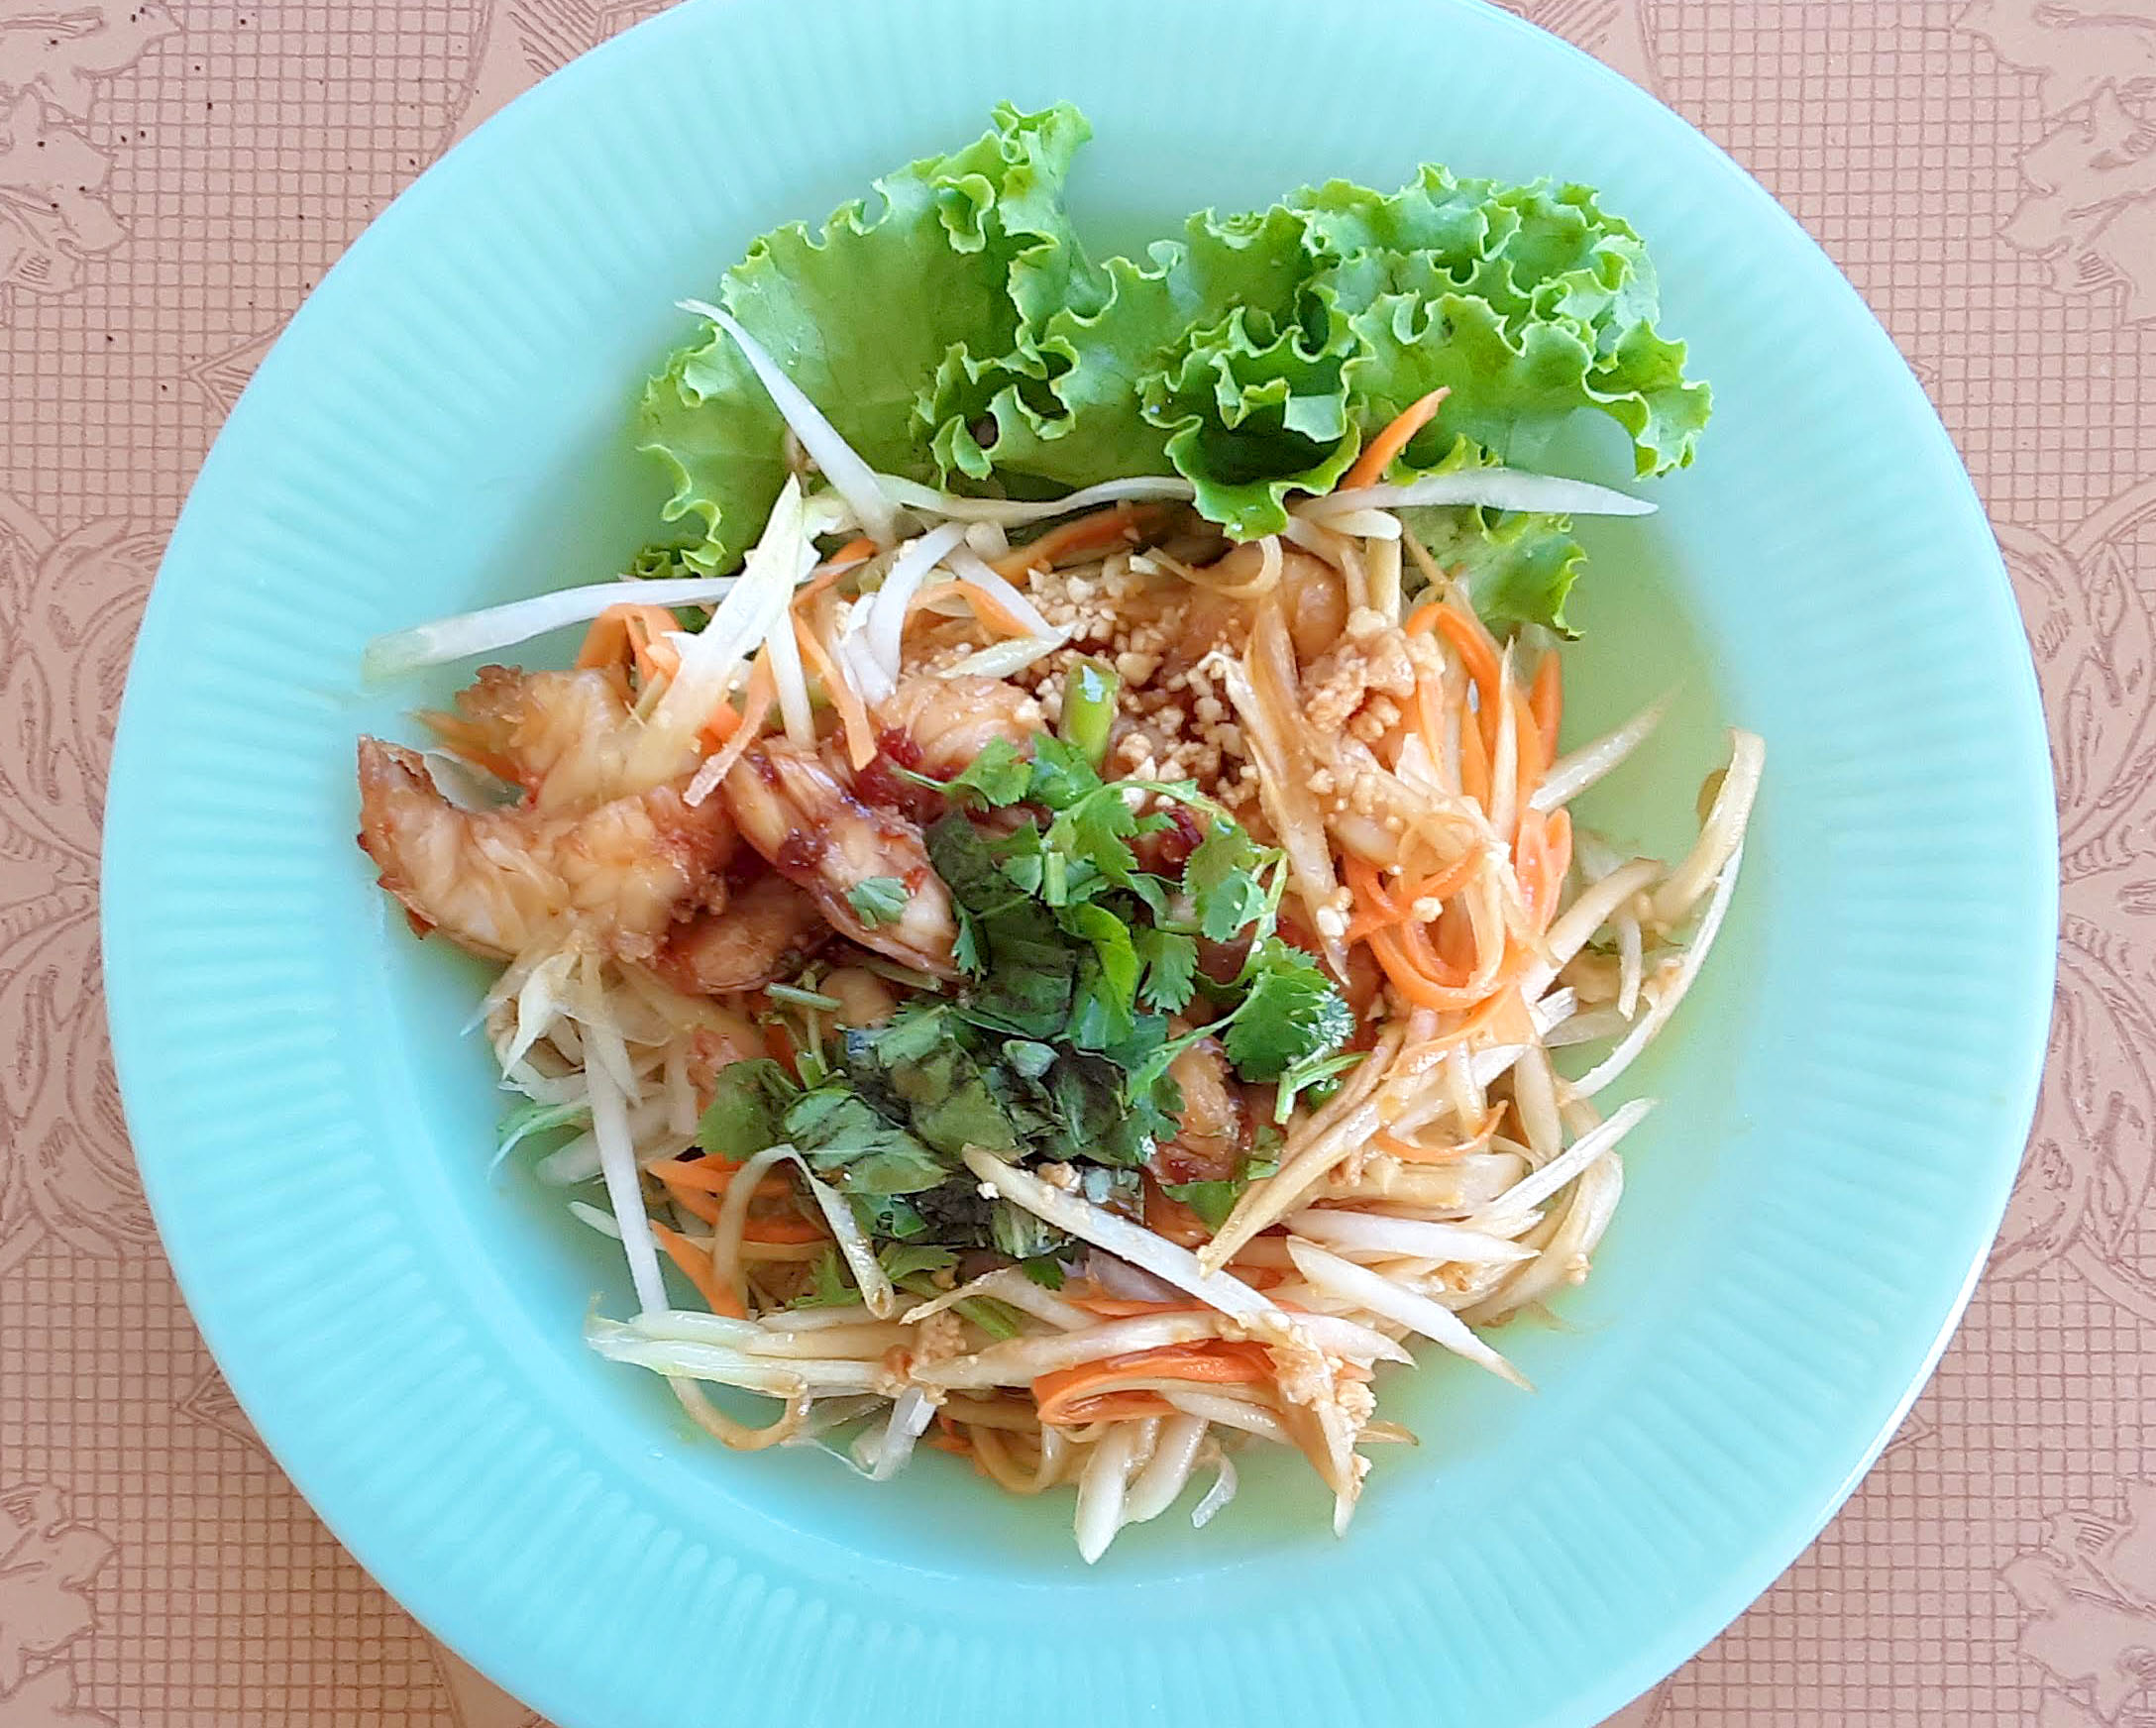 On a blue plate, there is a brightly colored fresh papaya salad. Photo by Paul Young.